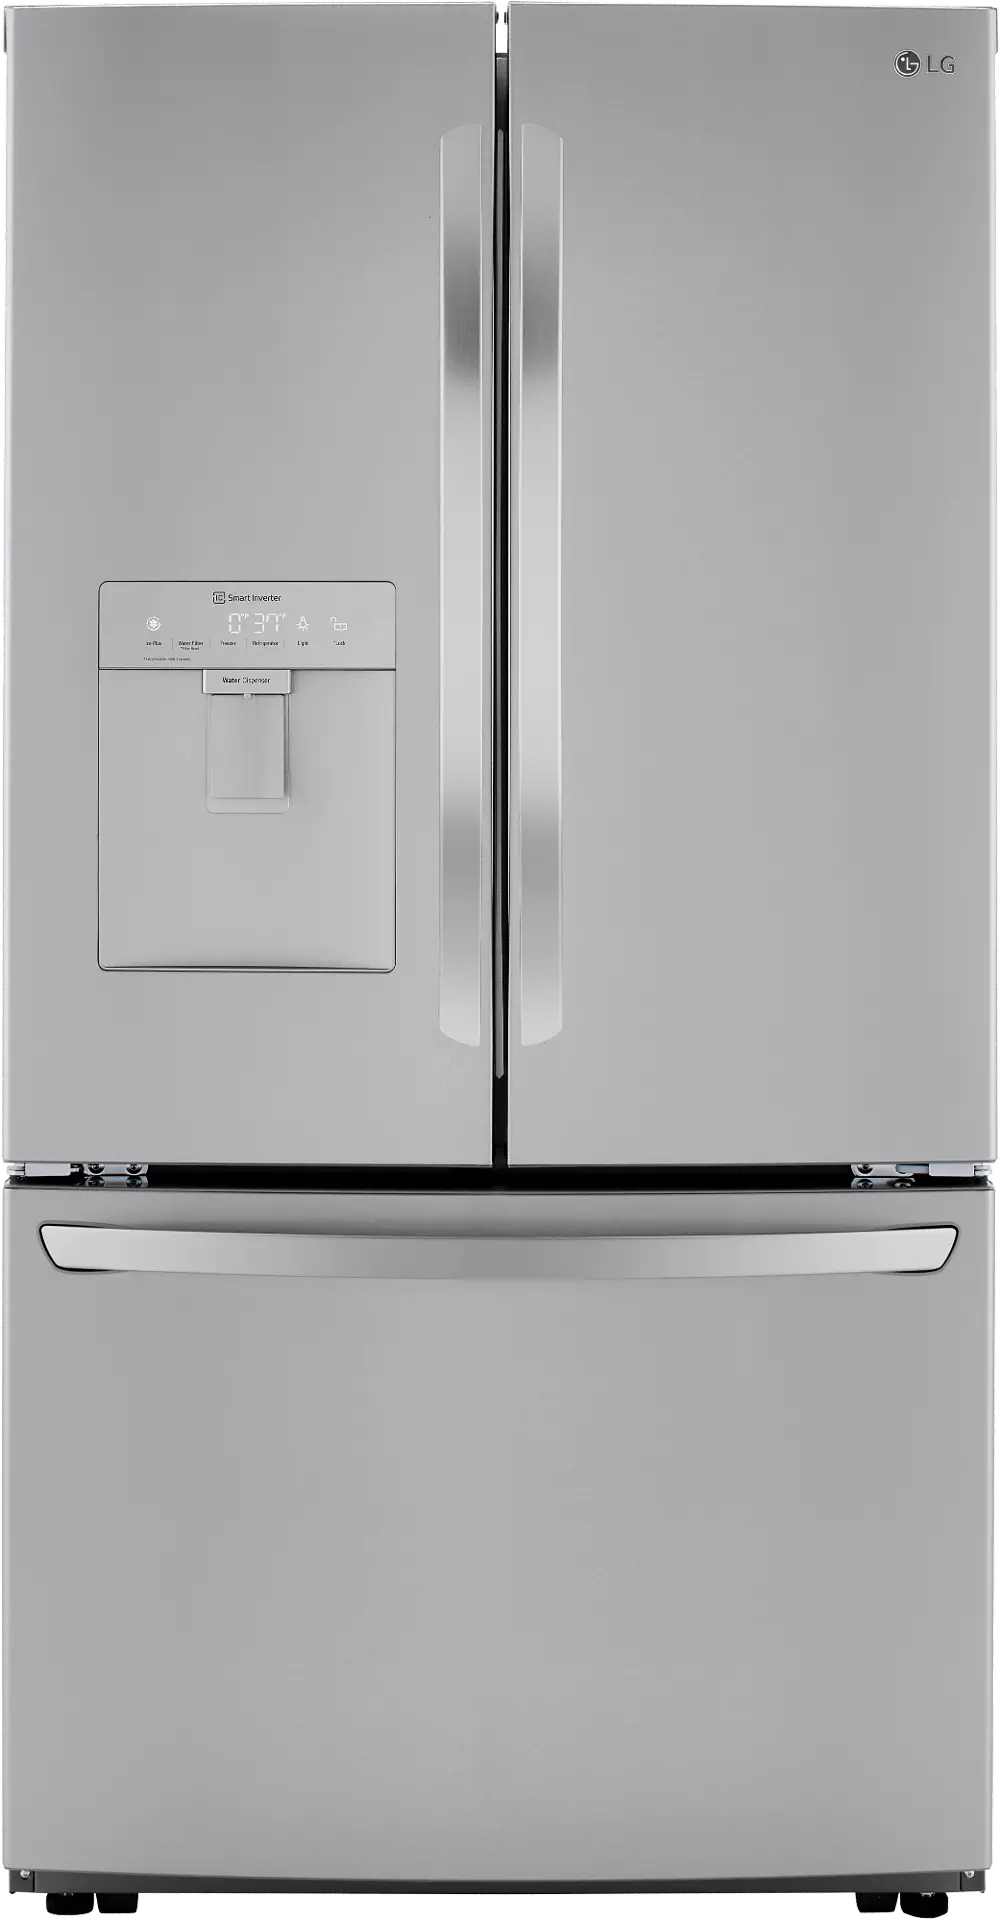 LRFWS2906S LG 29 cu ft French Door Refrigerator - Stainless Steel-1